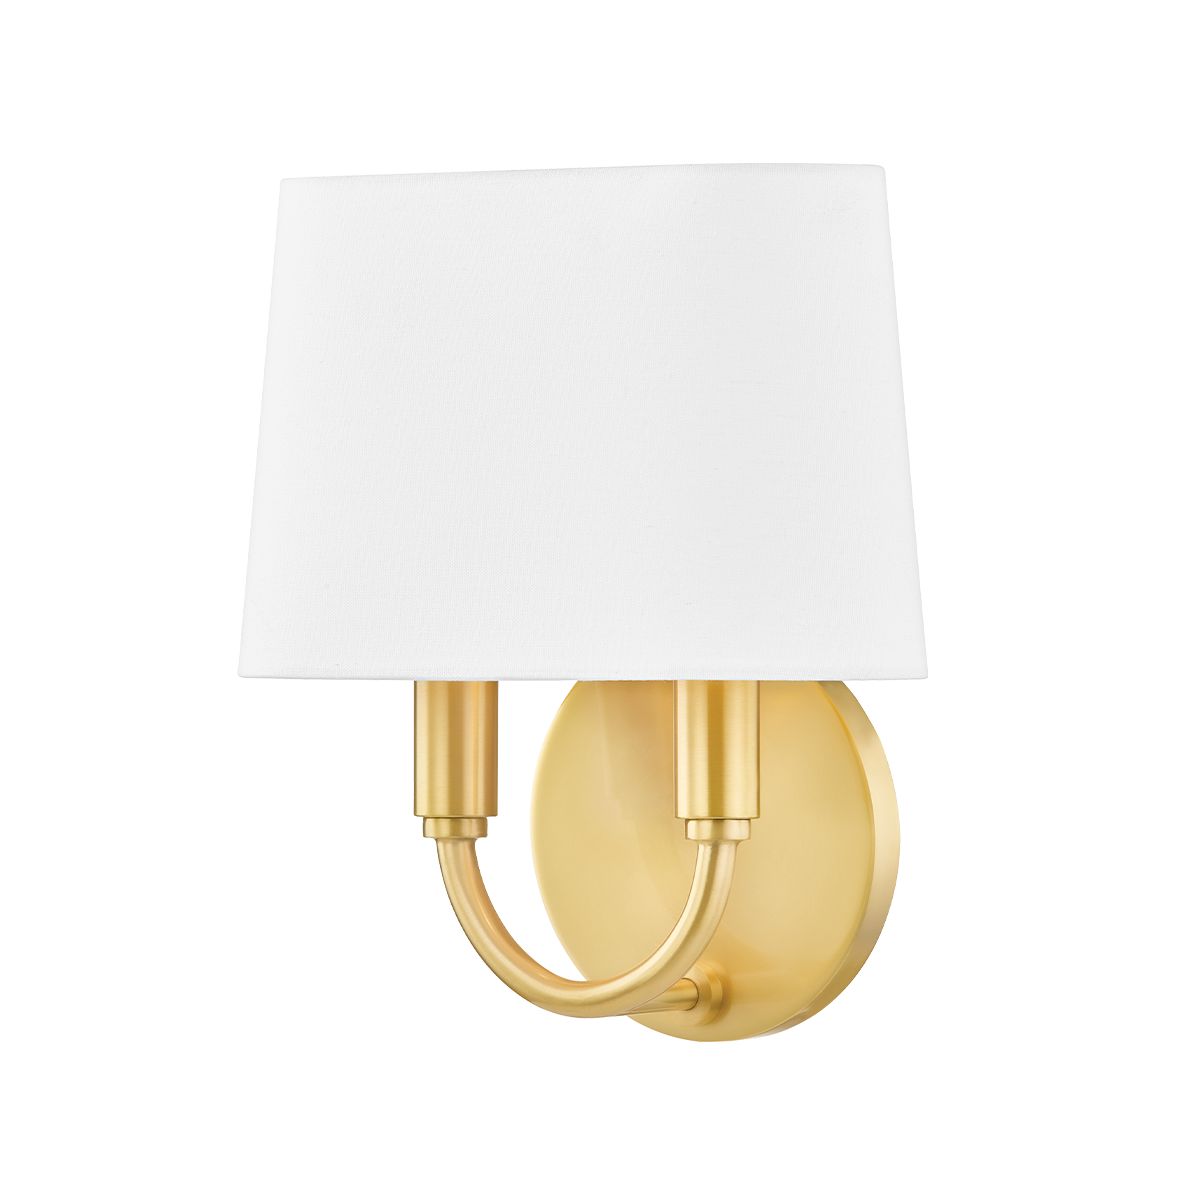 Clair 11 in. Armed Sconce